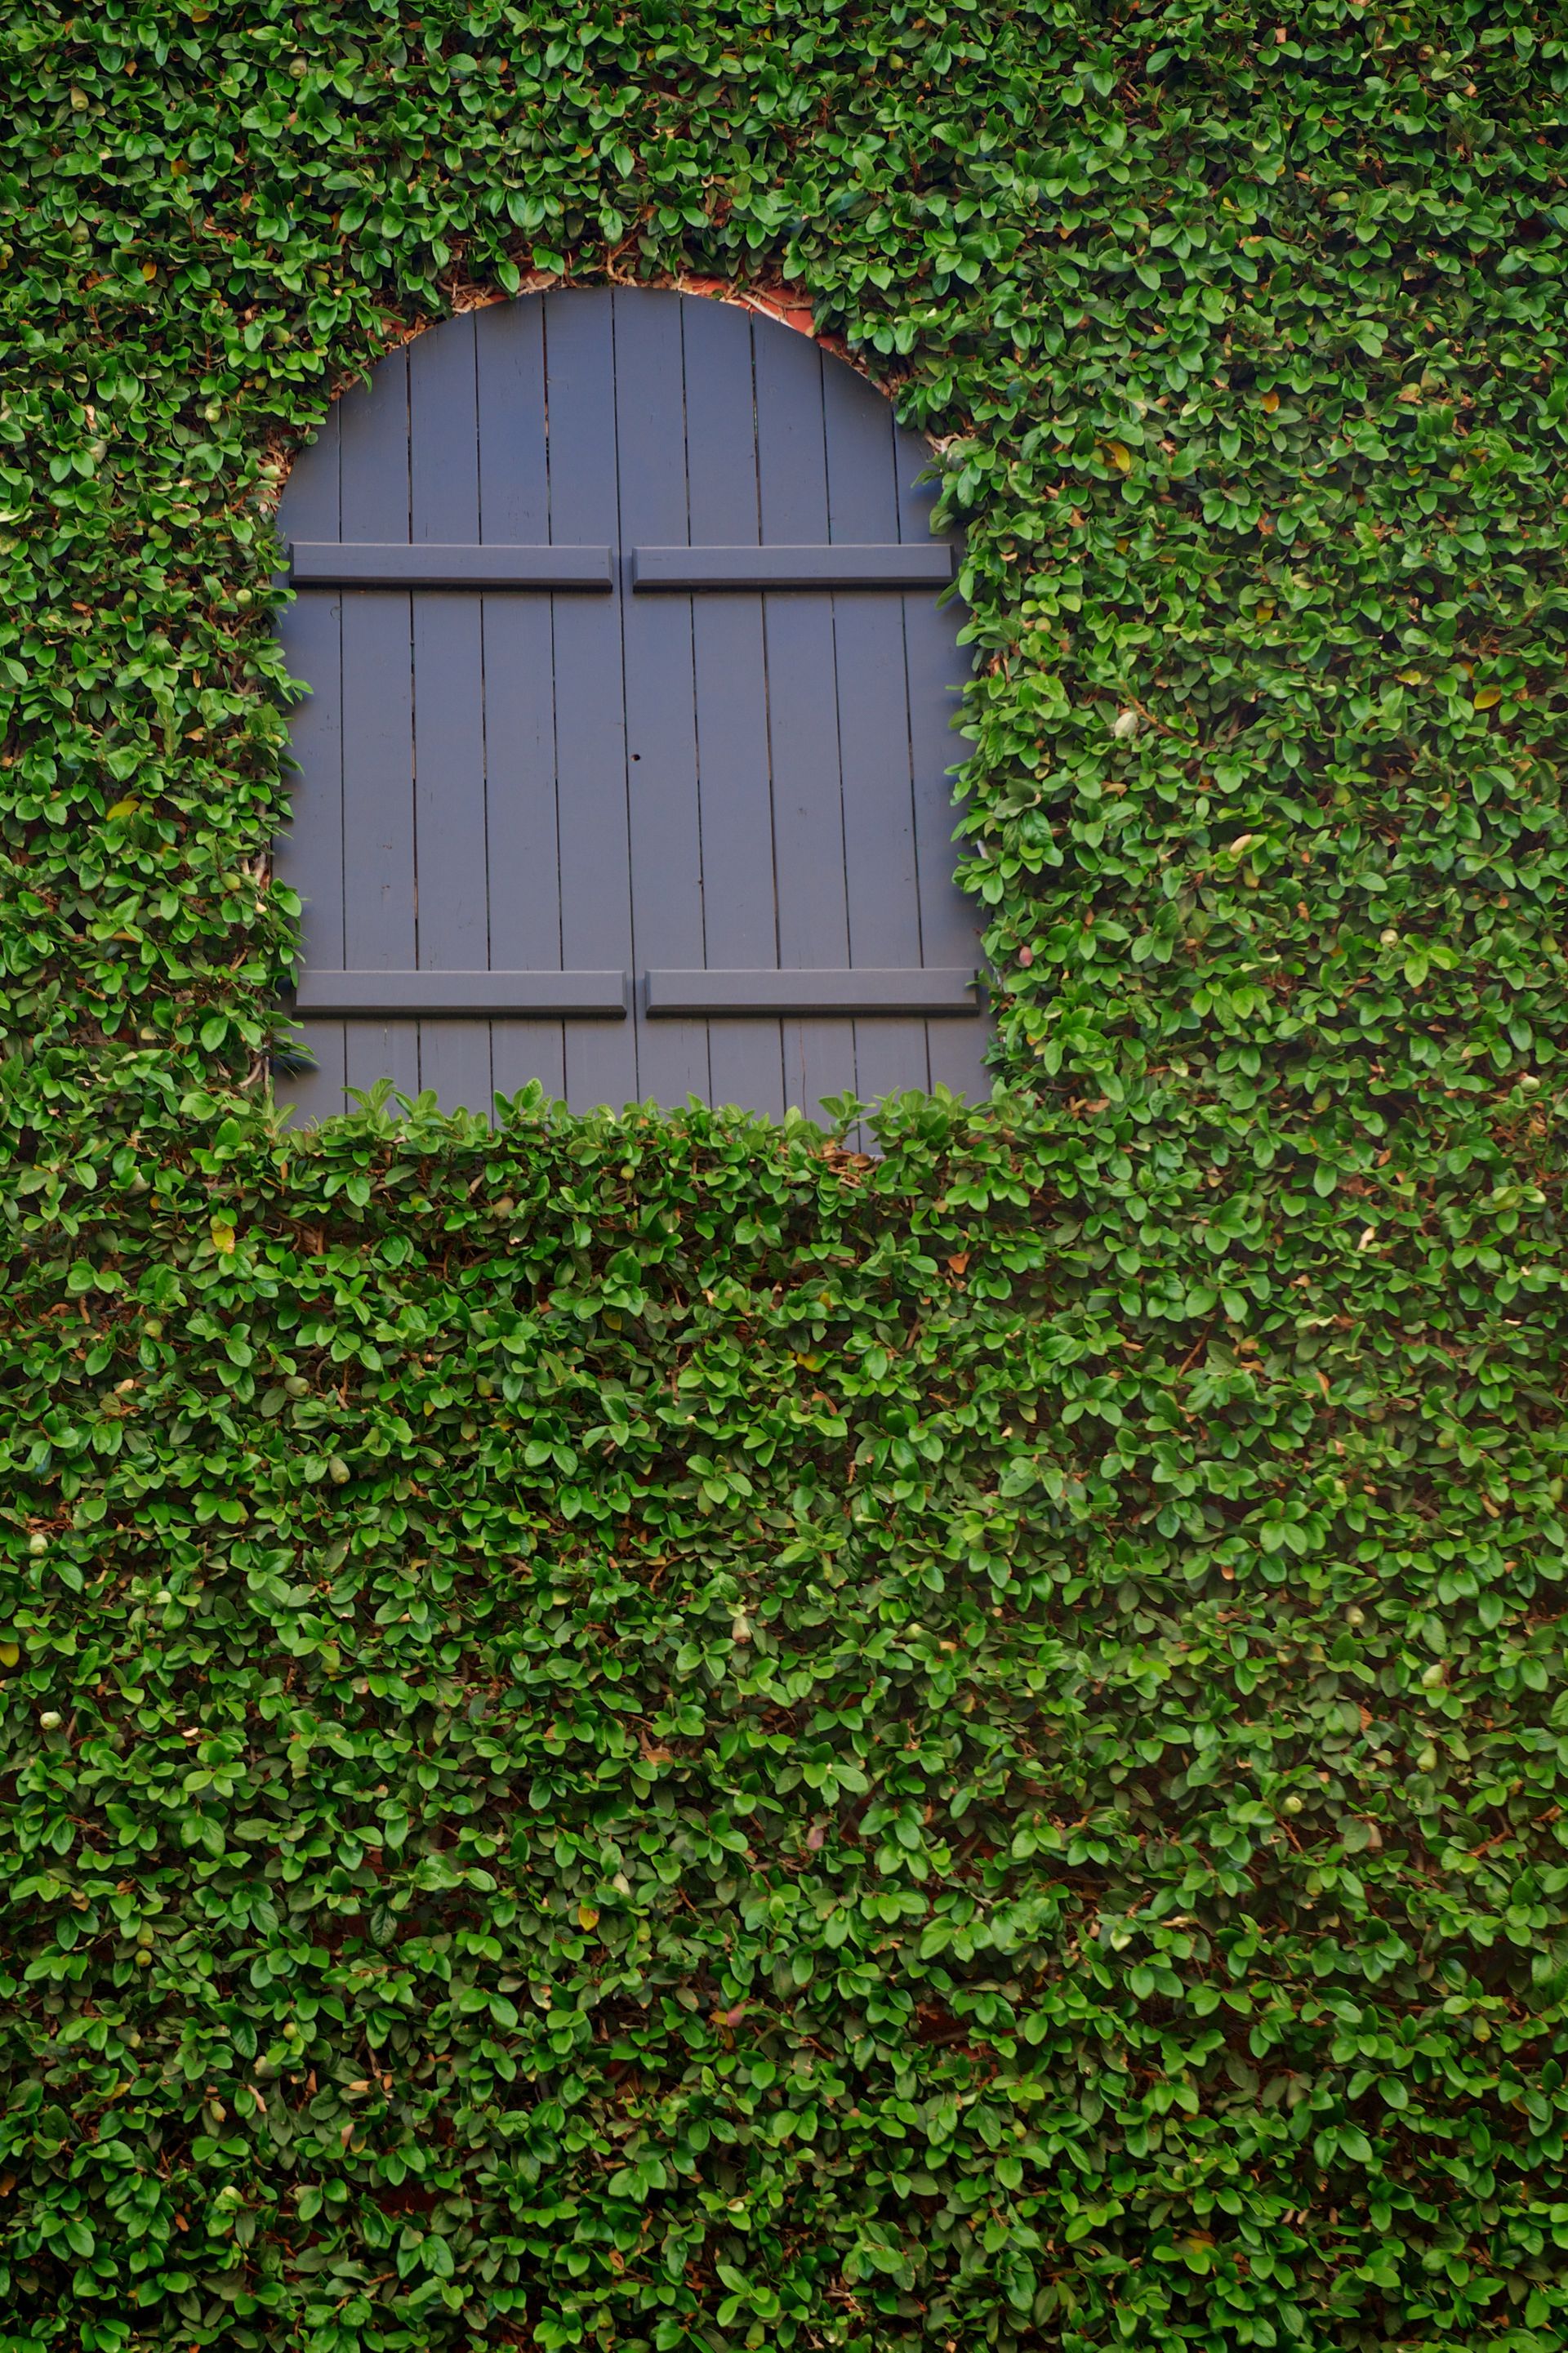 A wooden window surrounded by a wall of green ivy.